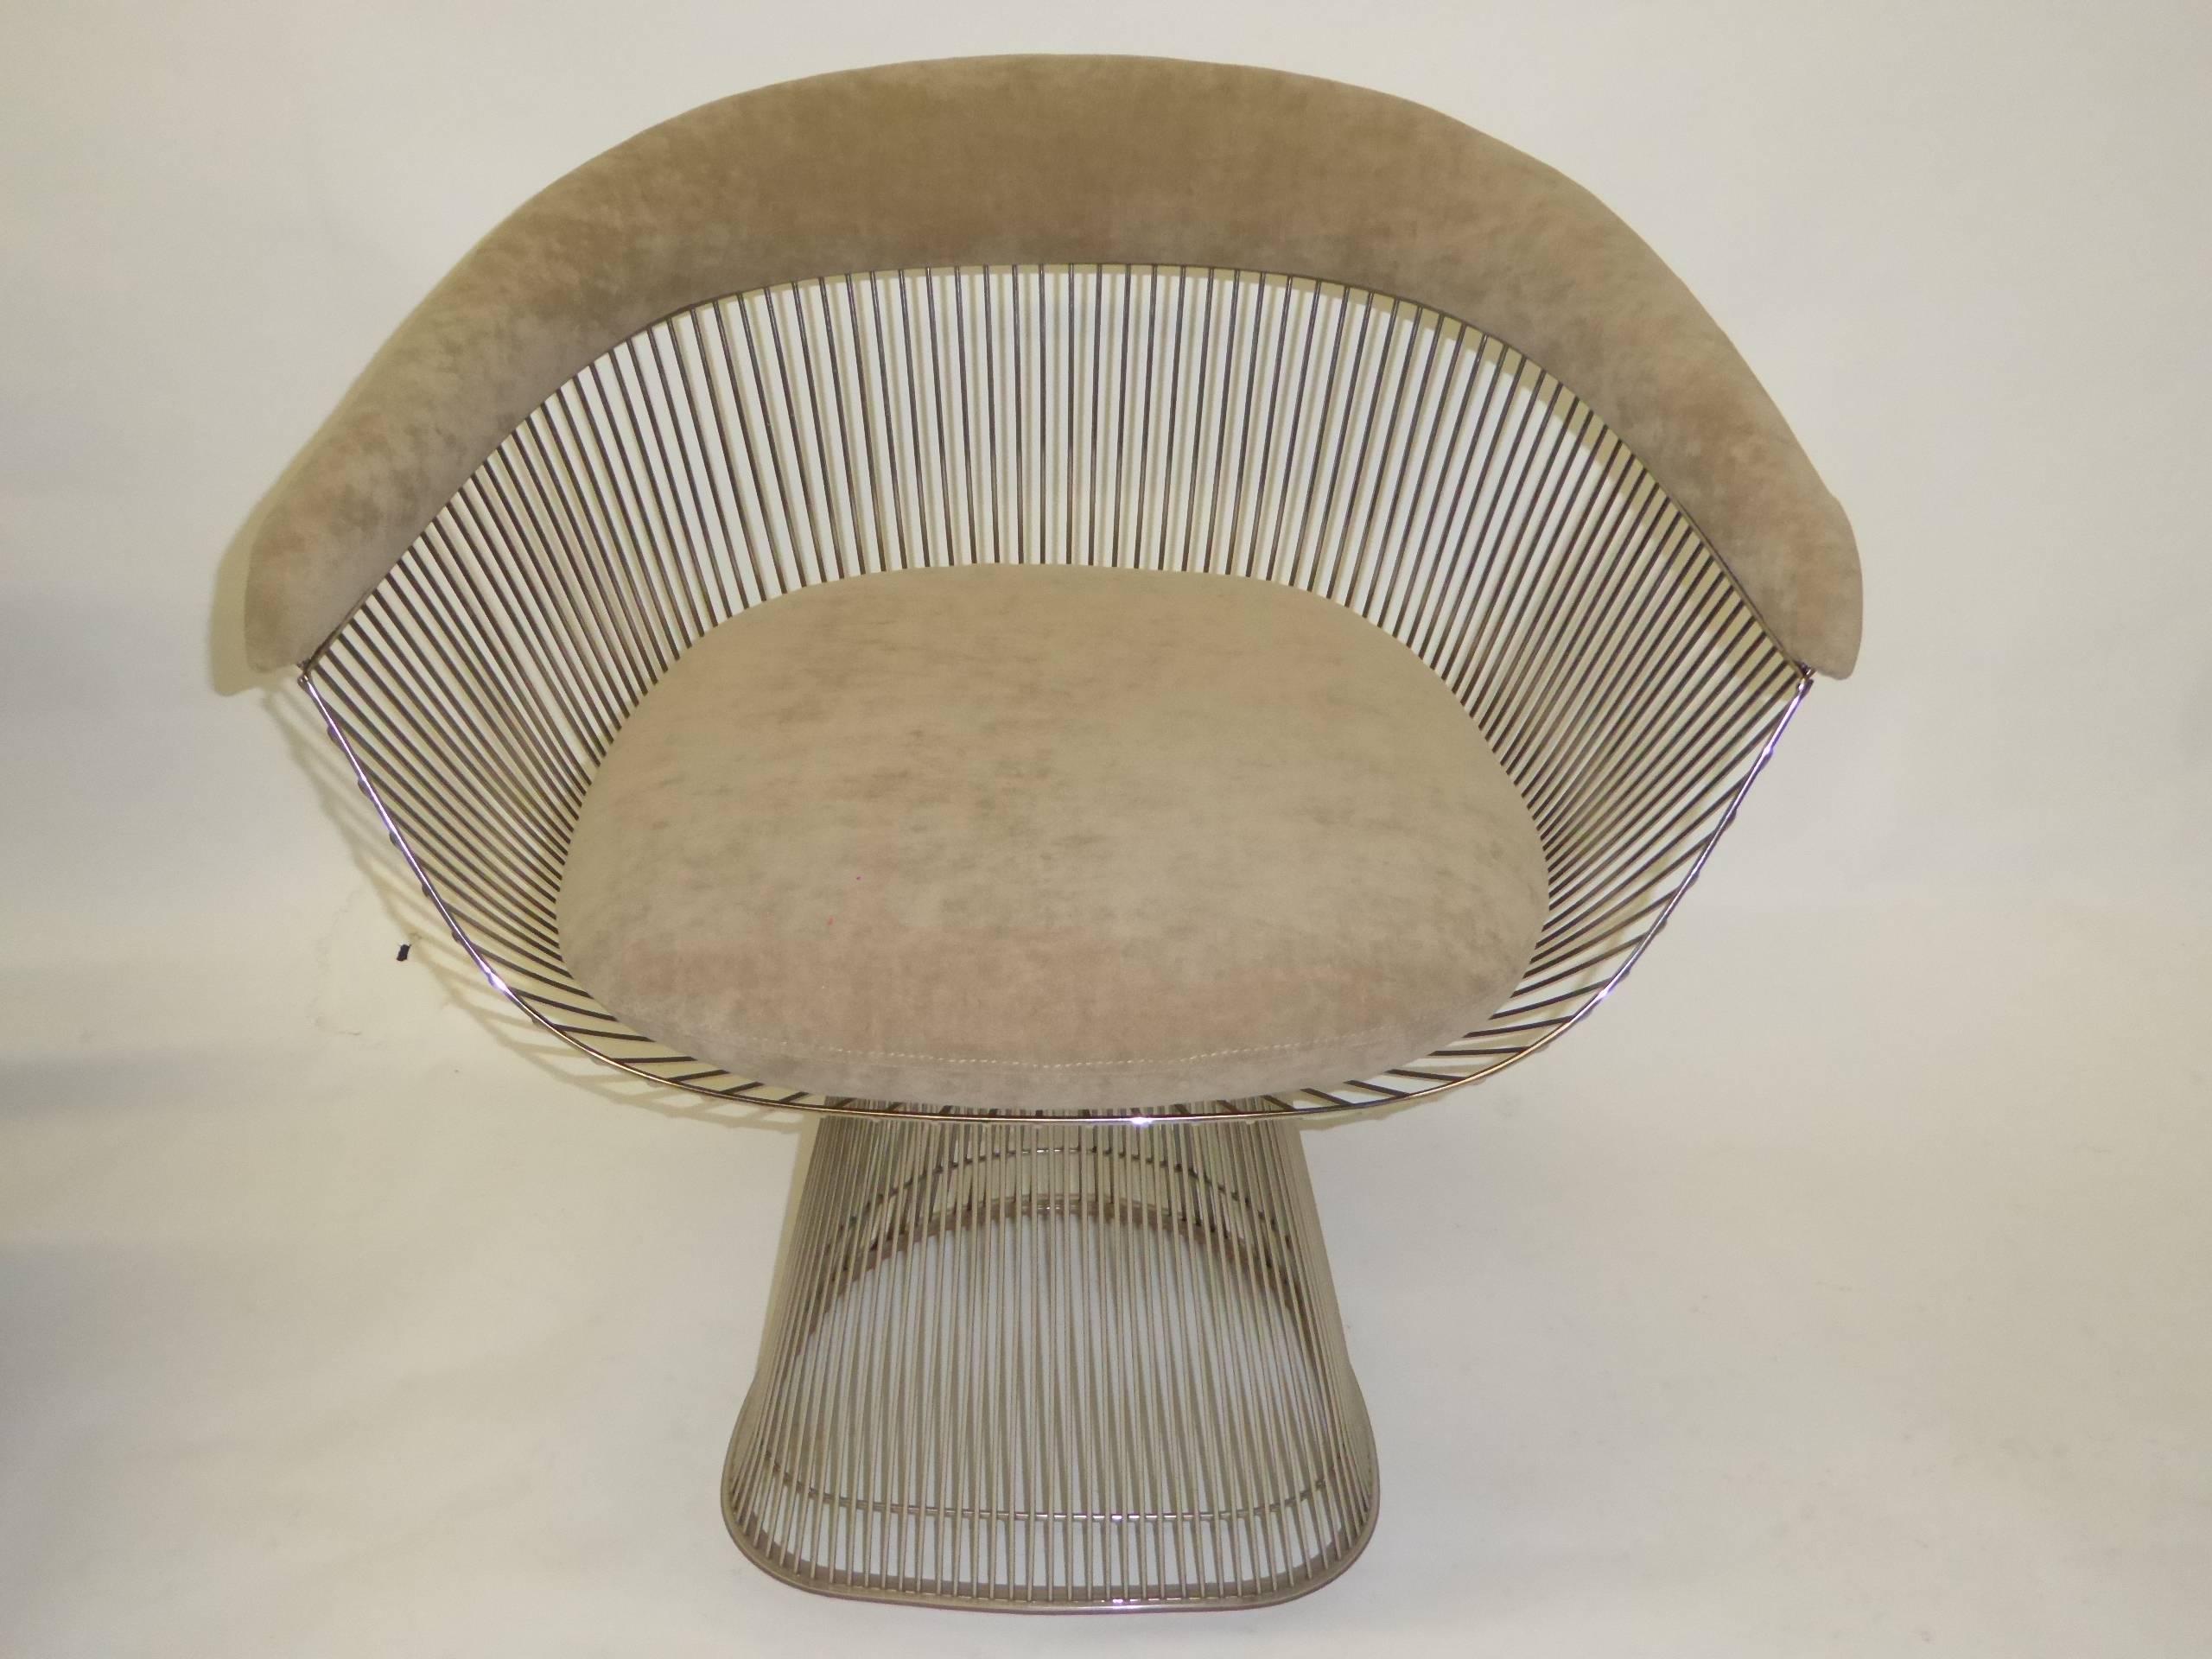 SOLD  Four steel wire Warren Platner armchairs from Knoll in cafe con leche moleskin velvet. Excellent original condition with new fabric.

For trade pricing please contact dealer.

Measurements:
28 1/2